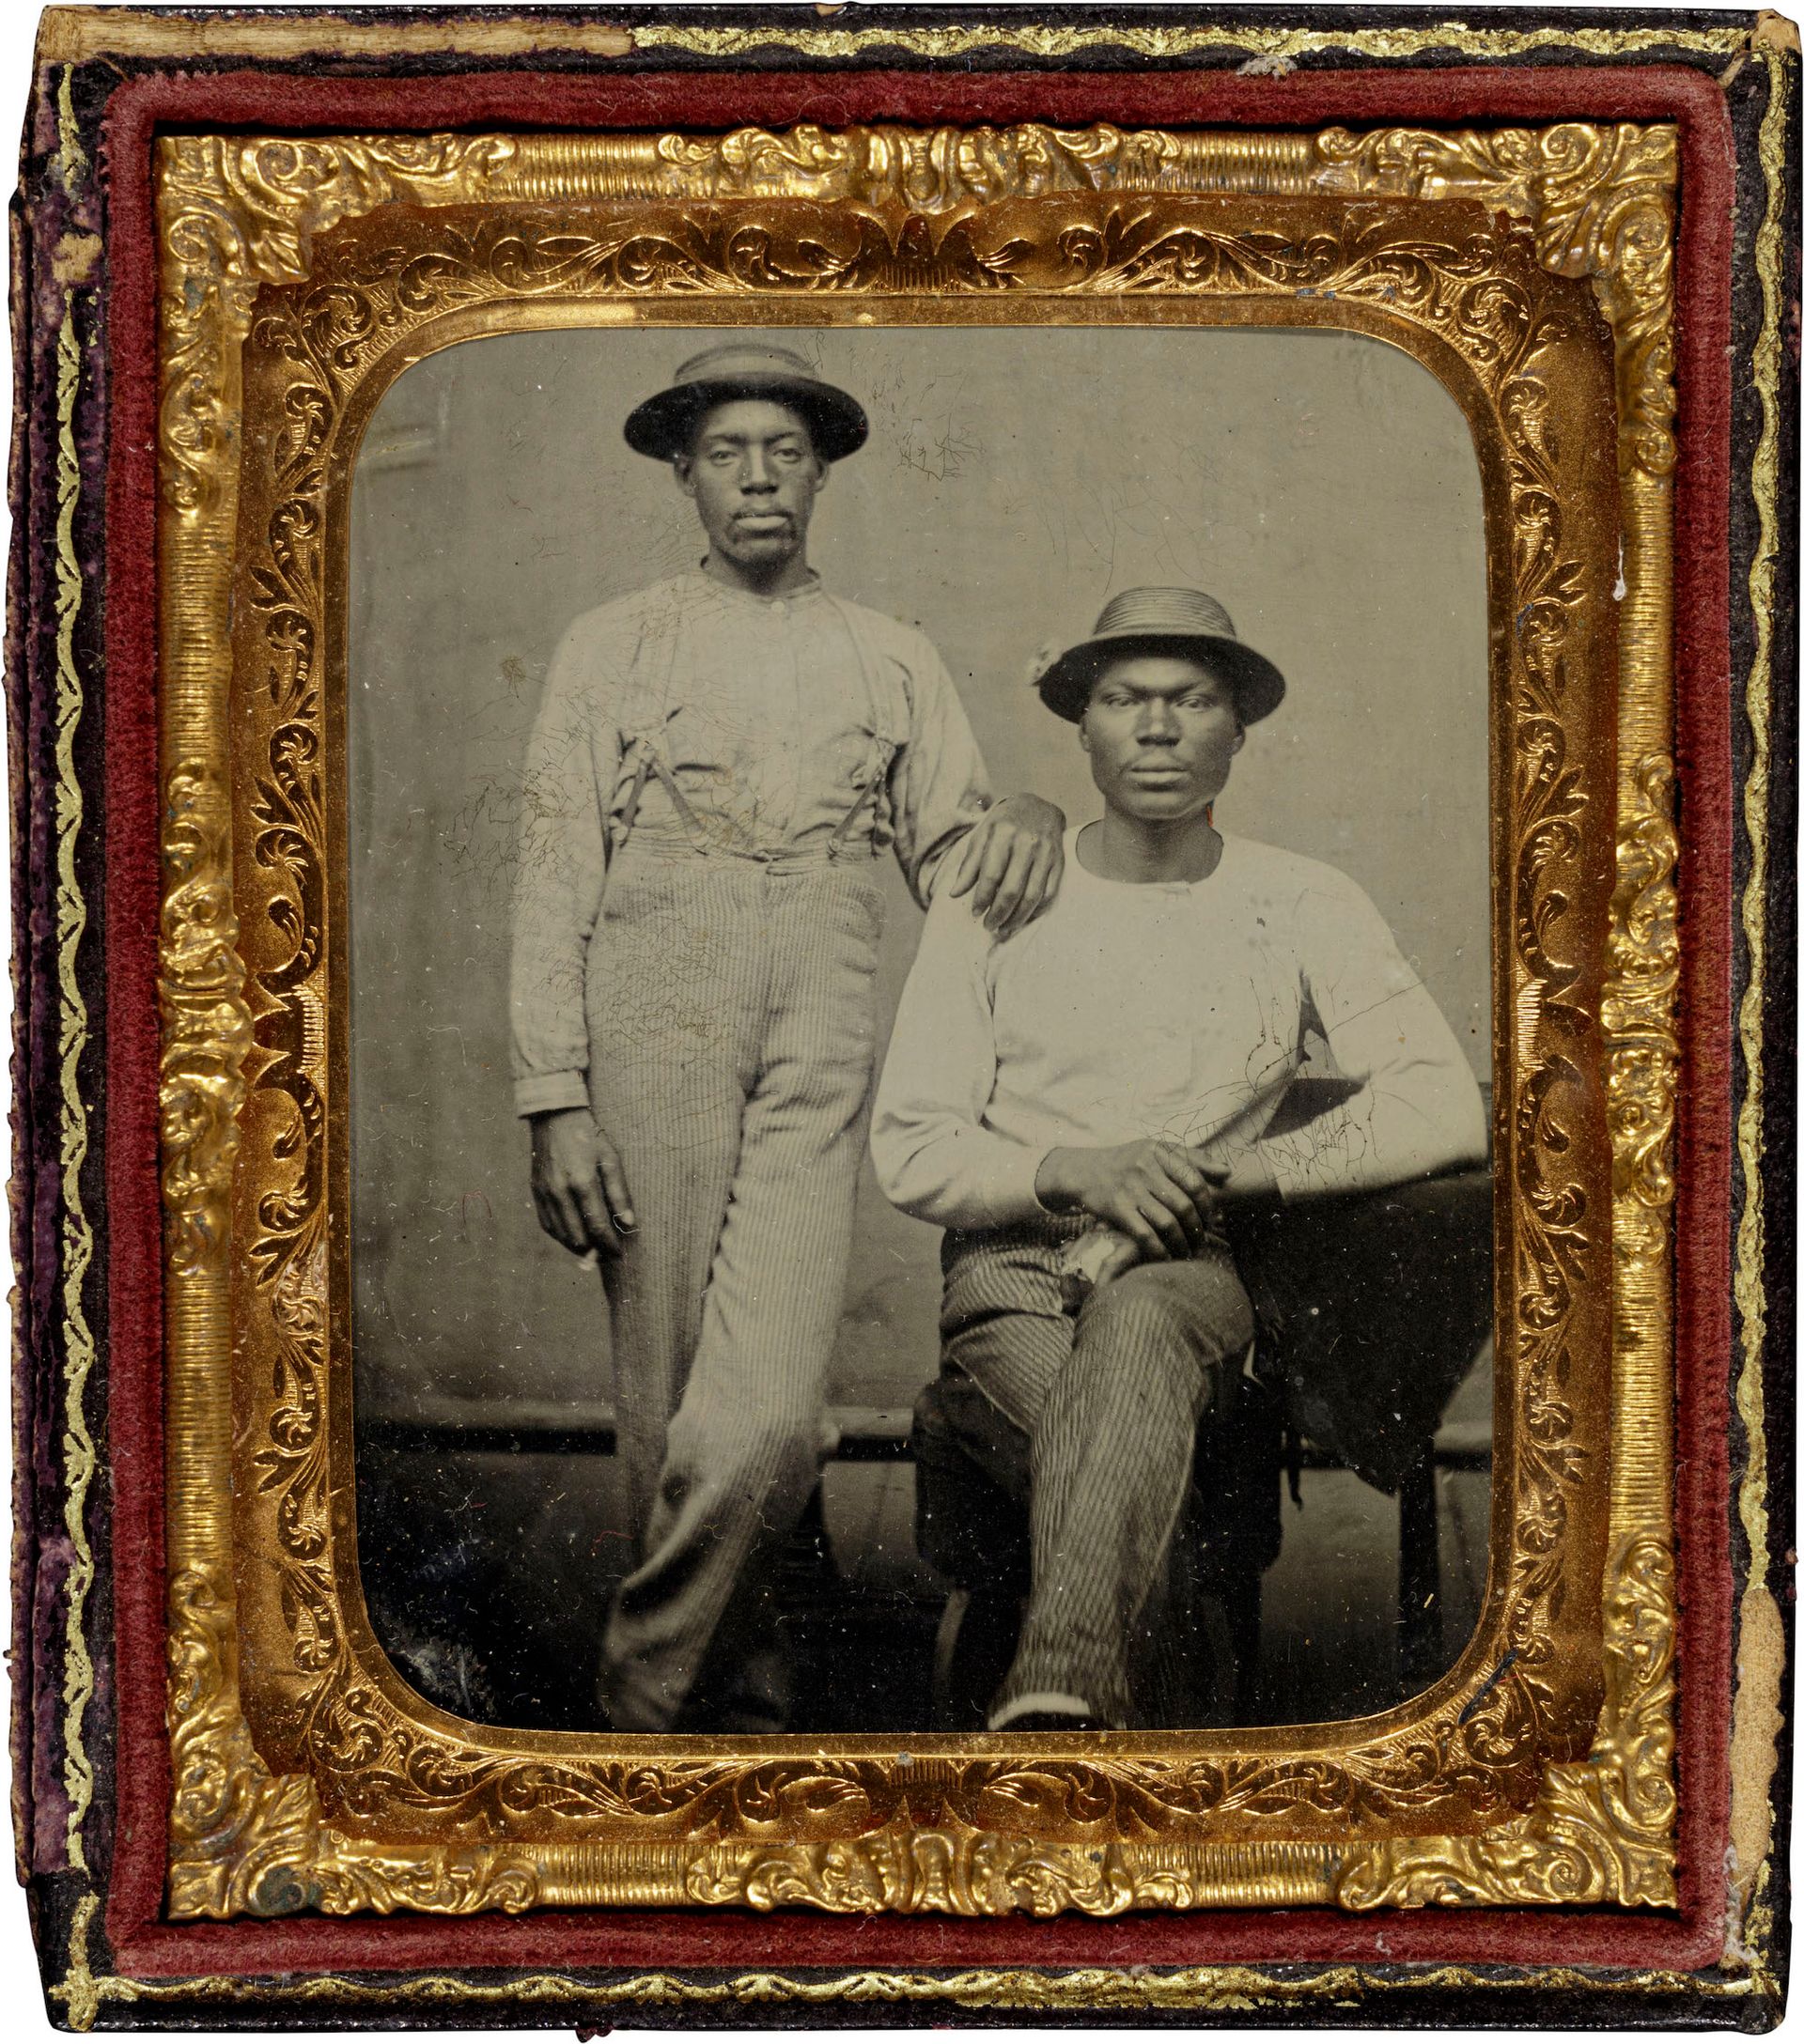 Unidentified photographer, [Untitled] (Two Men in Work Clothes, Wearing Hats, One Standing, One Seated), around 1880, tintype New Orleans Museum of Art, Gift of Stanley B. Burns, MD